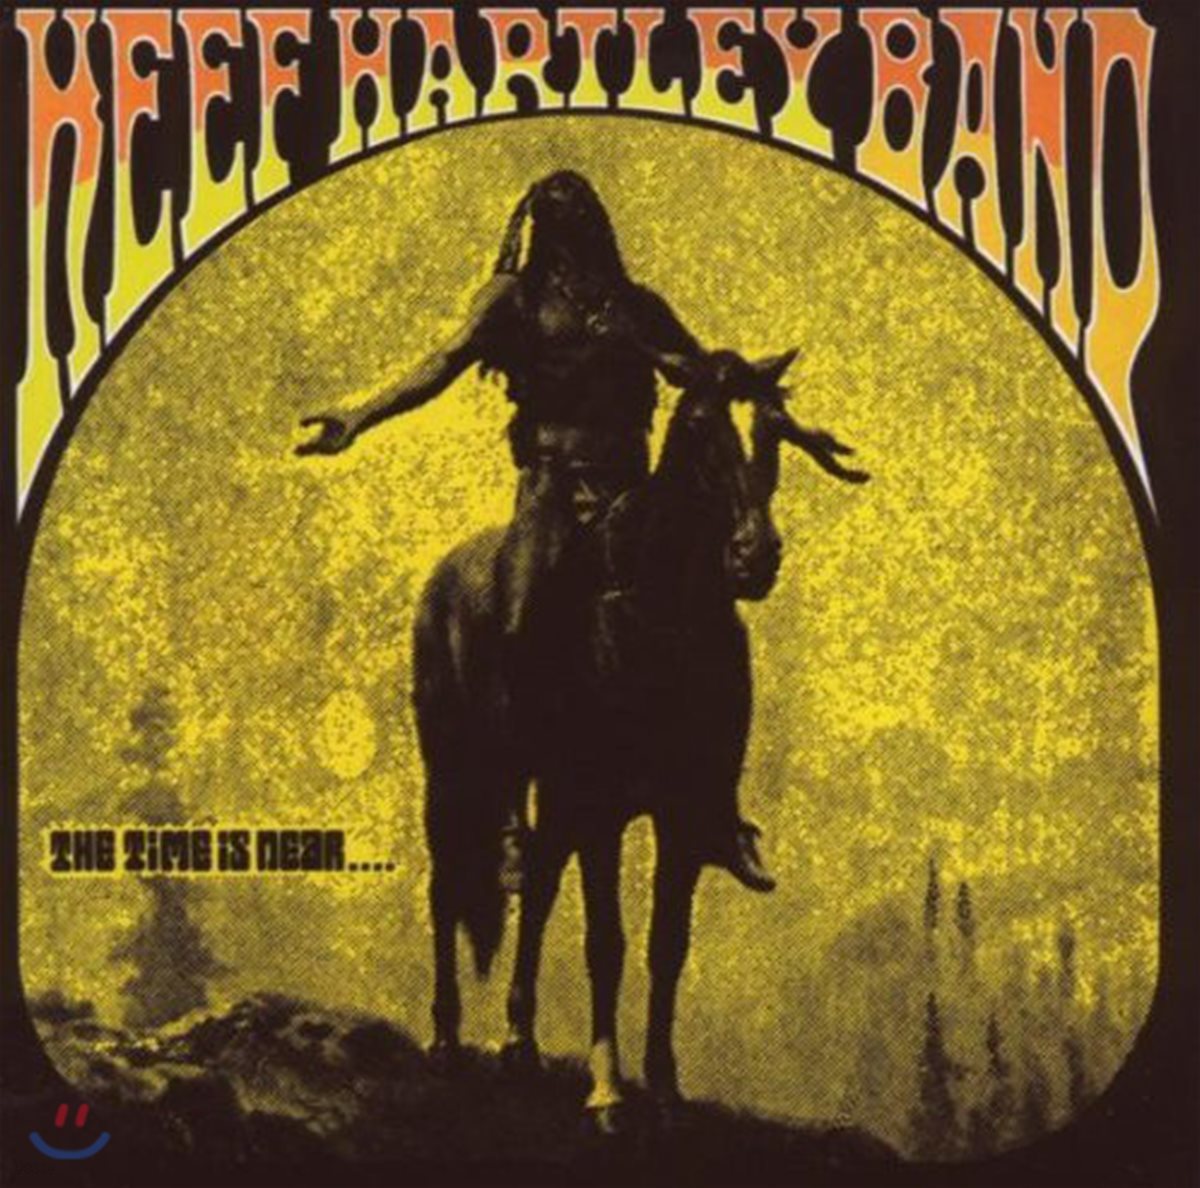 The Keef Hartley Band (키프 하틀리 밴드) - The Time Is Near